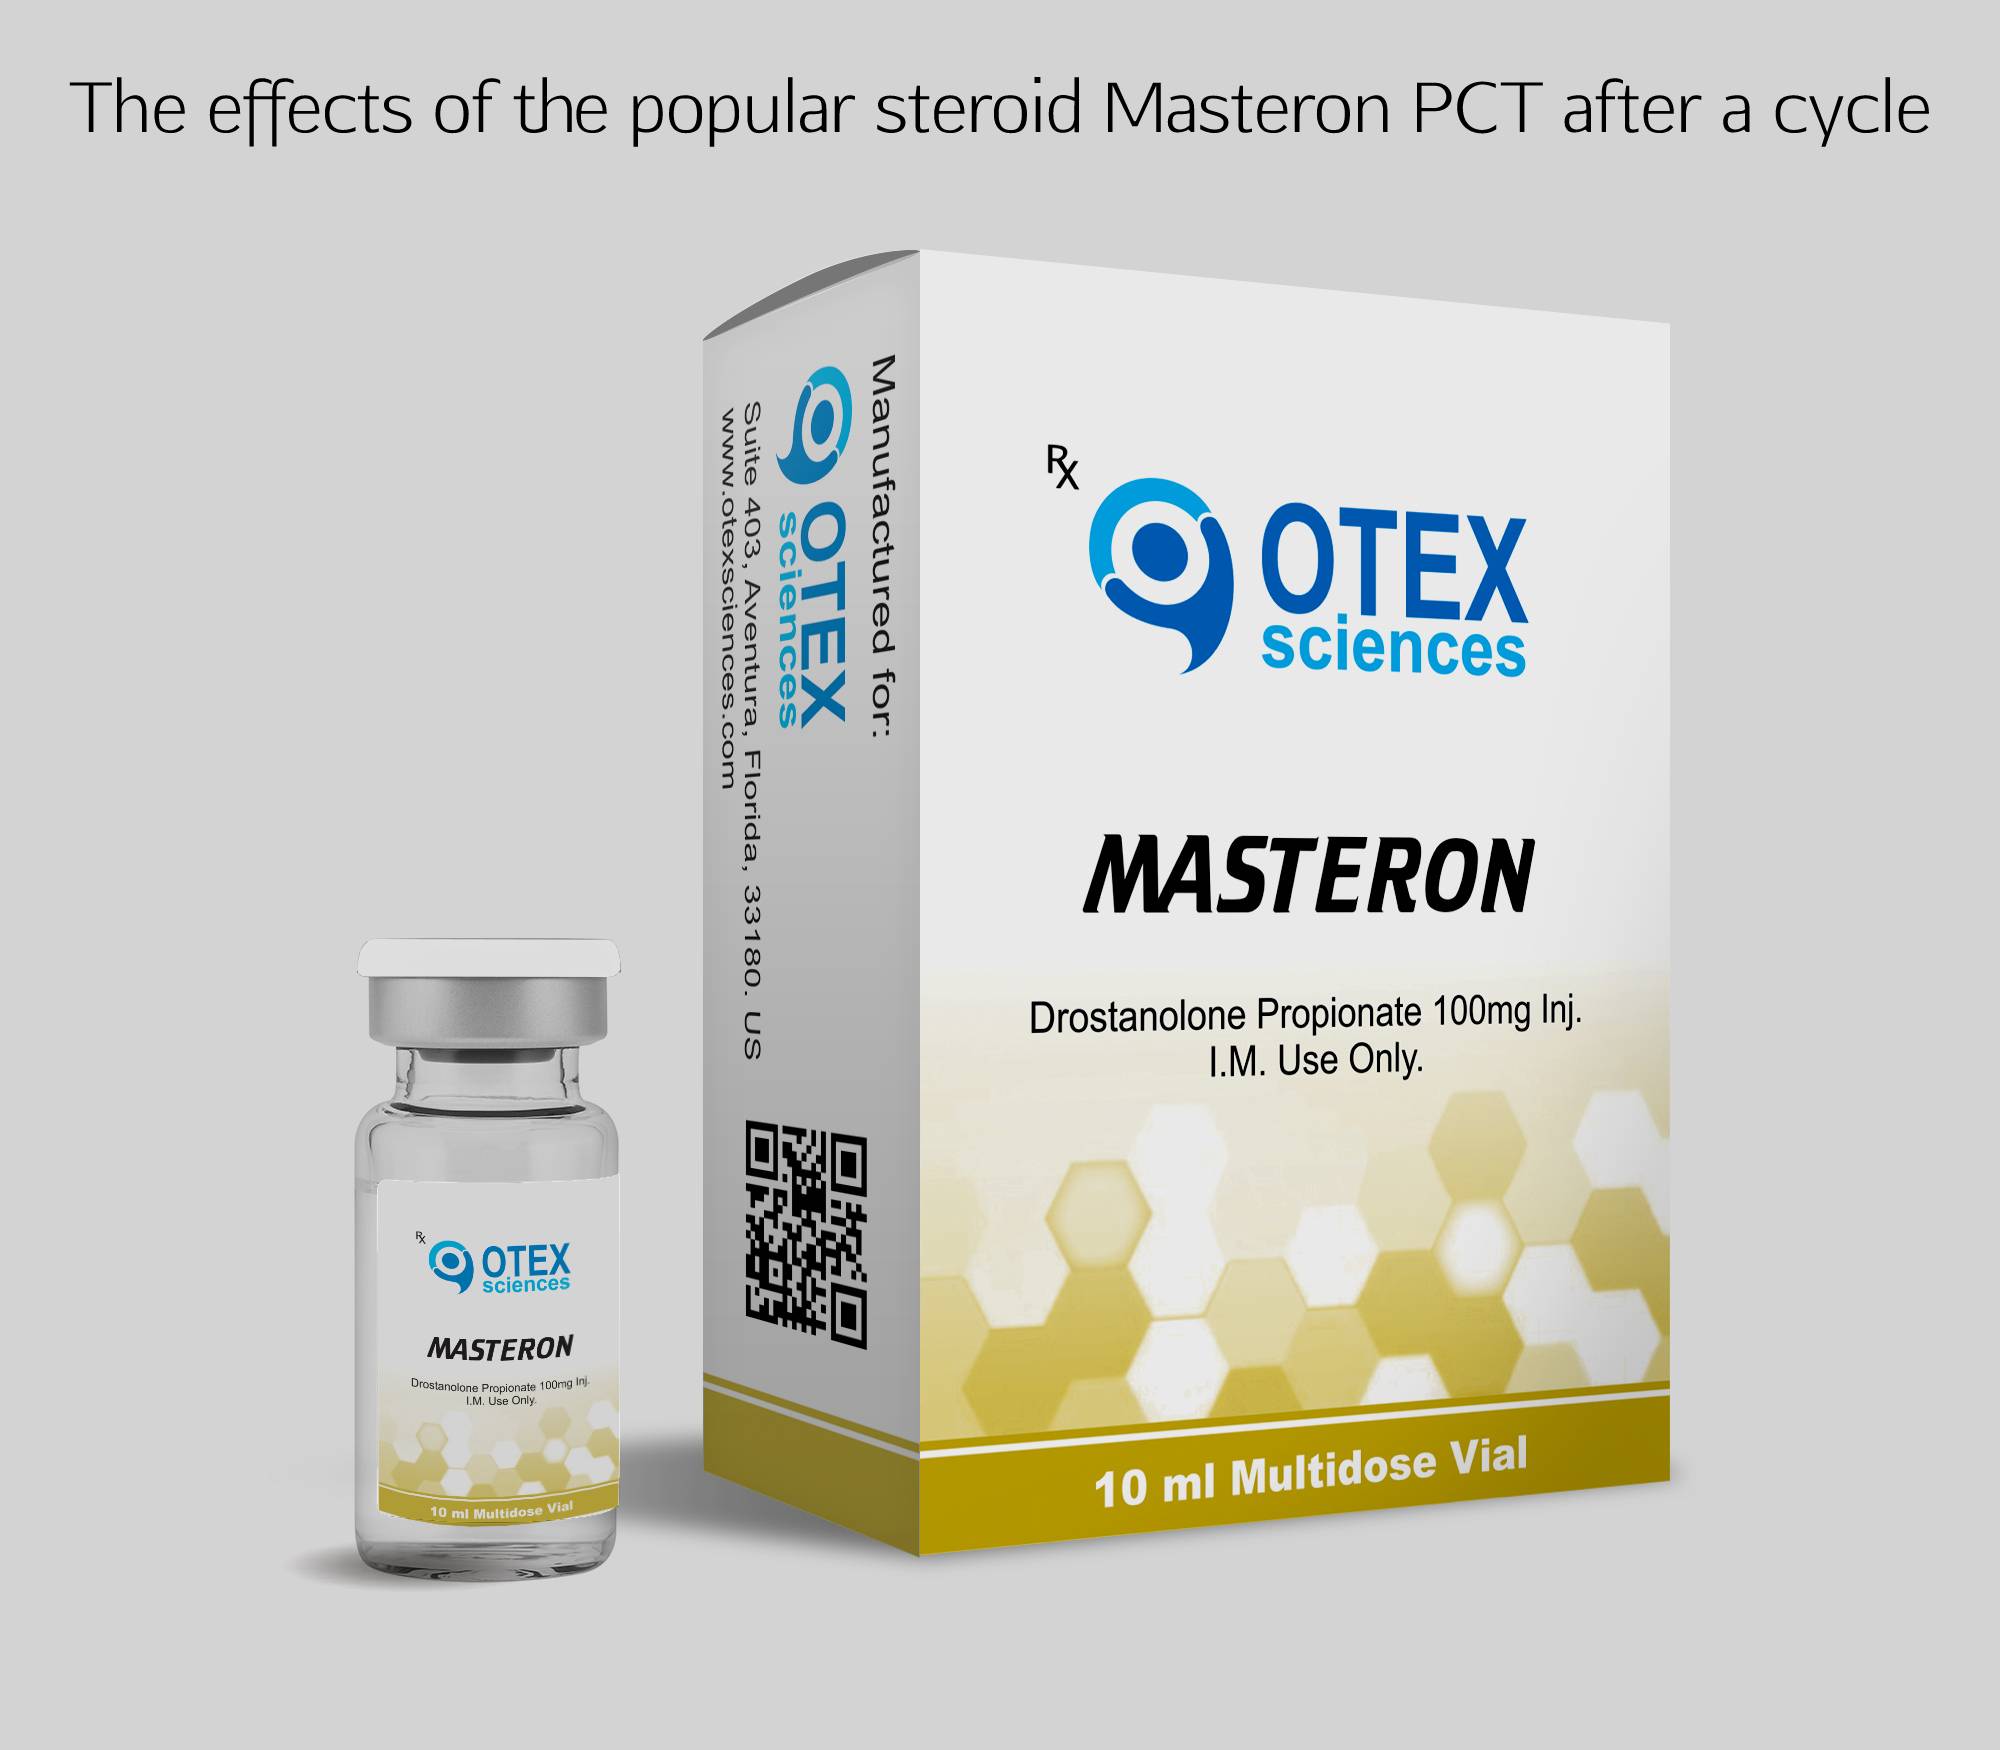 The effects of the popular steroid Masteron PCT after a cycle